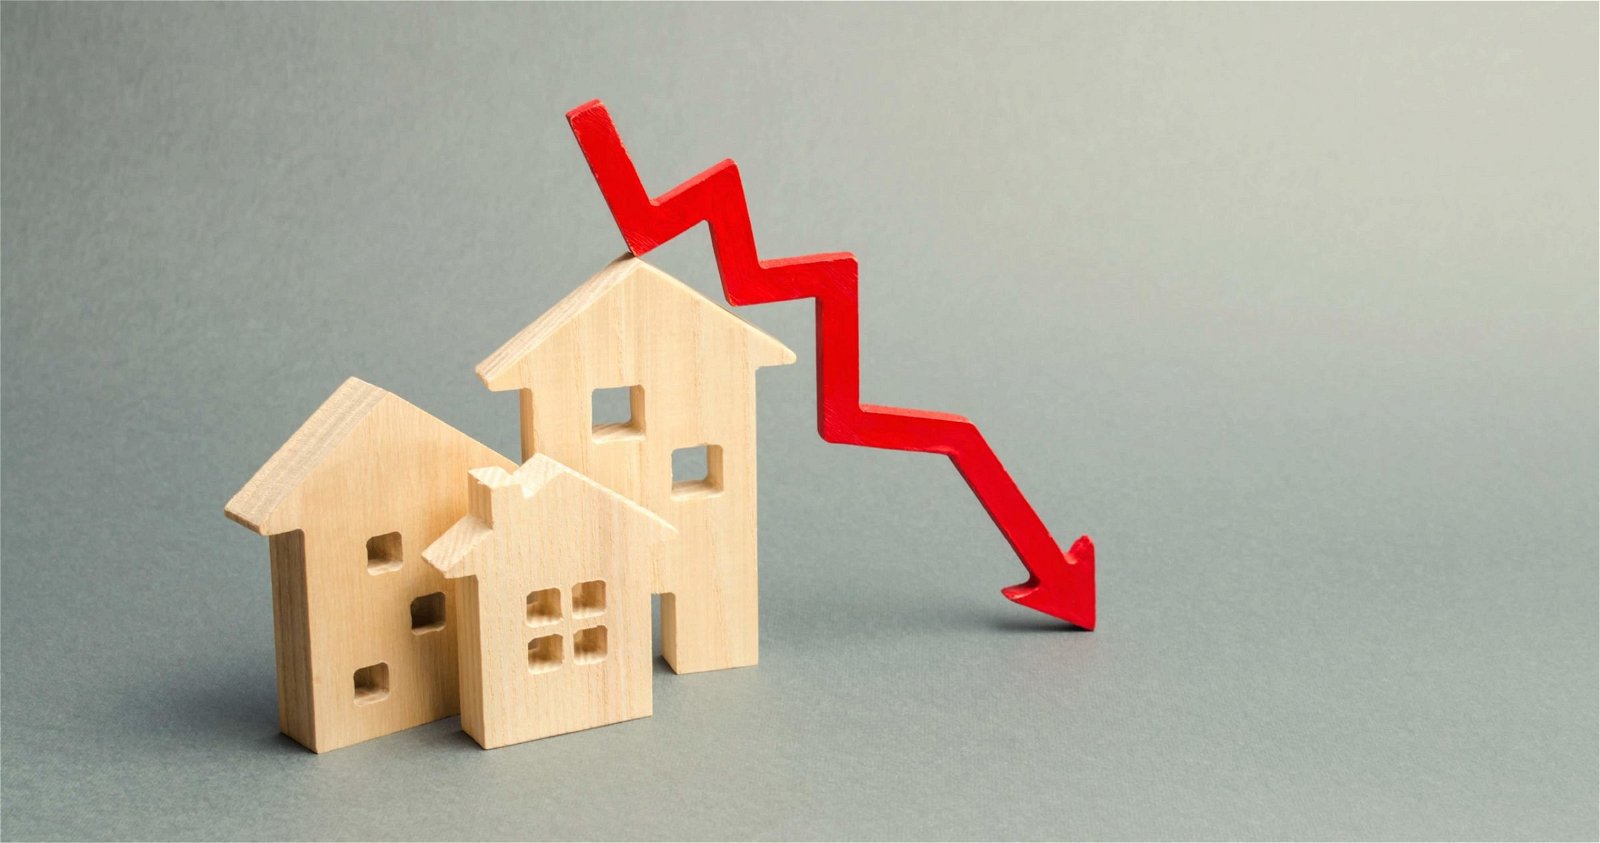 Home Building Industry Decline scaled